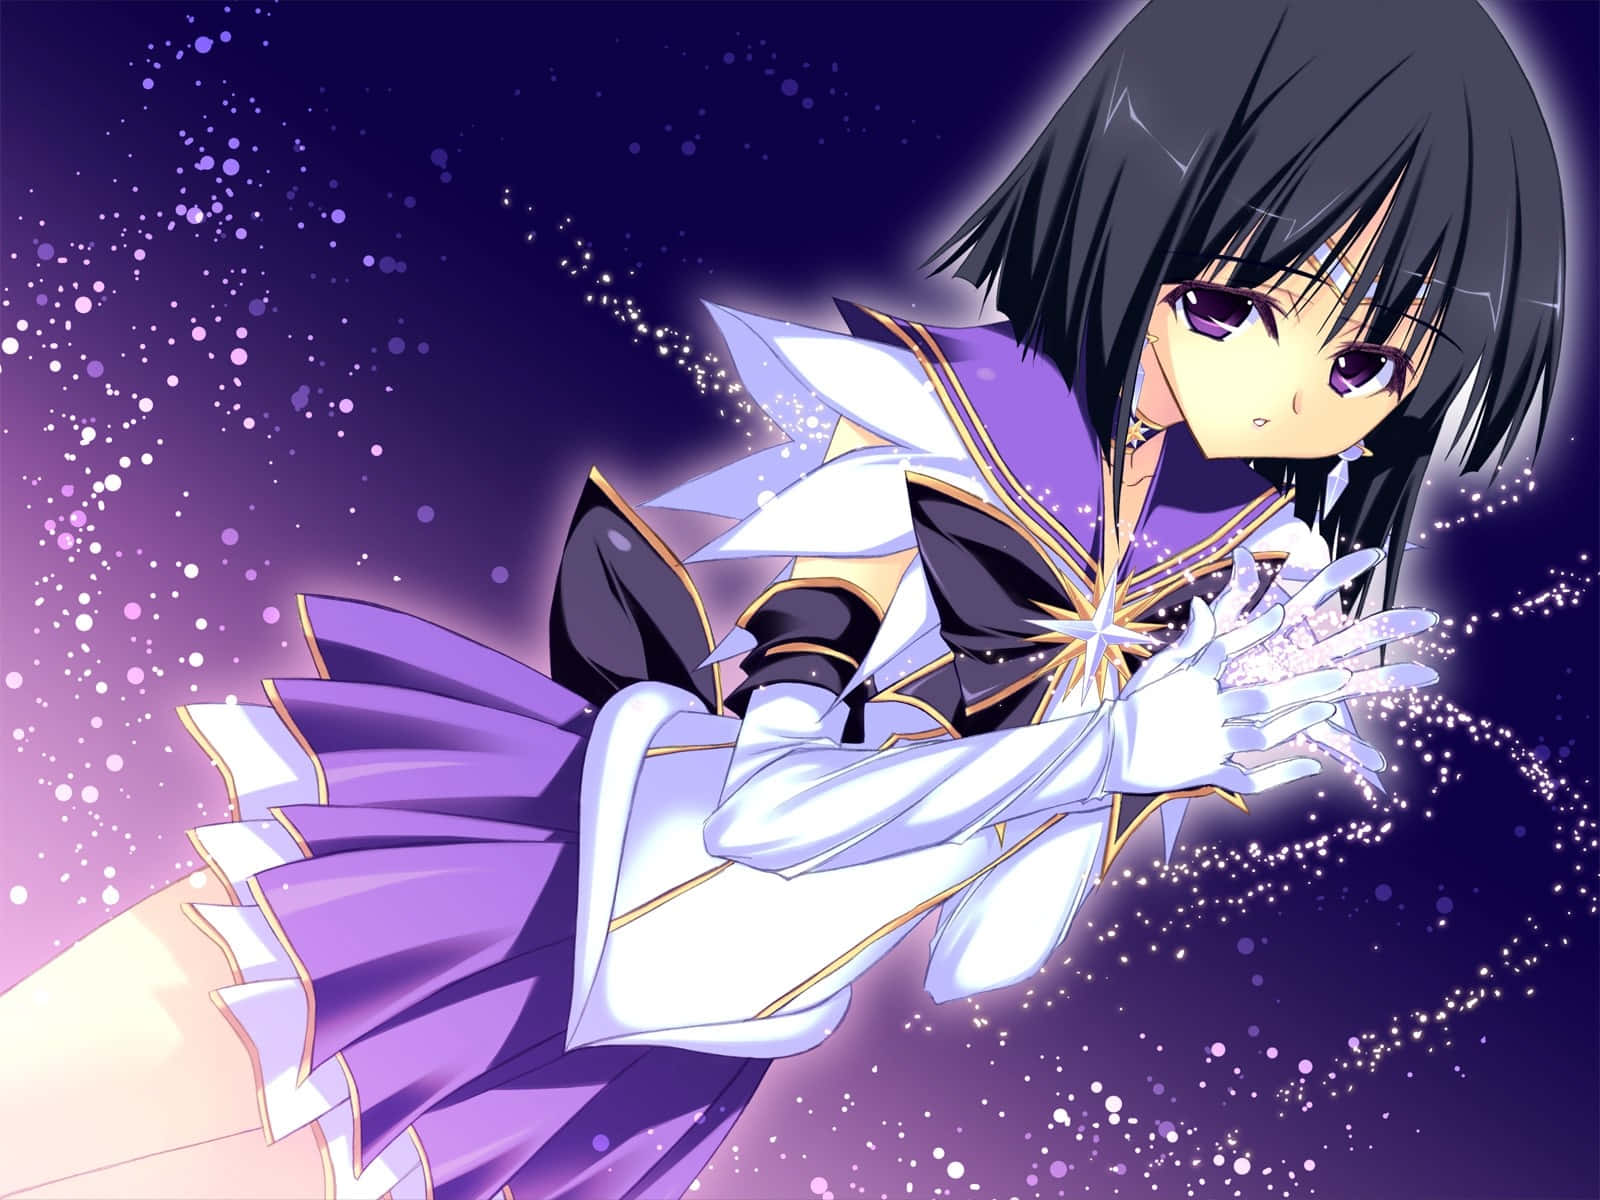 Sailor Saturn From The Anime Series “sailor Moon” Background